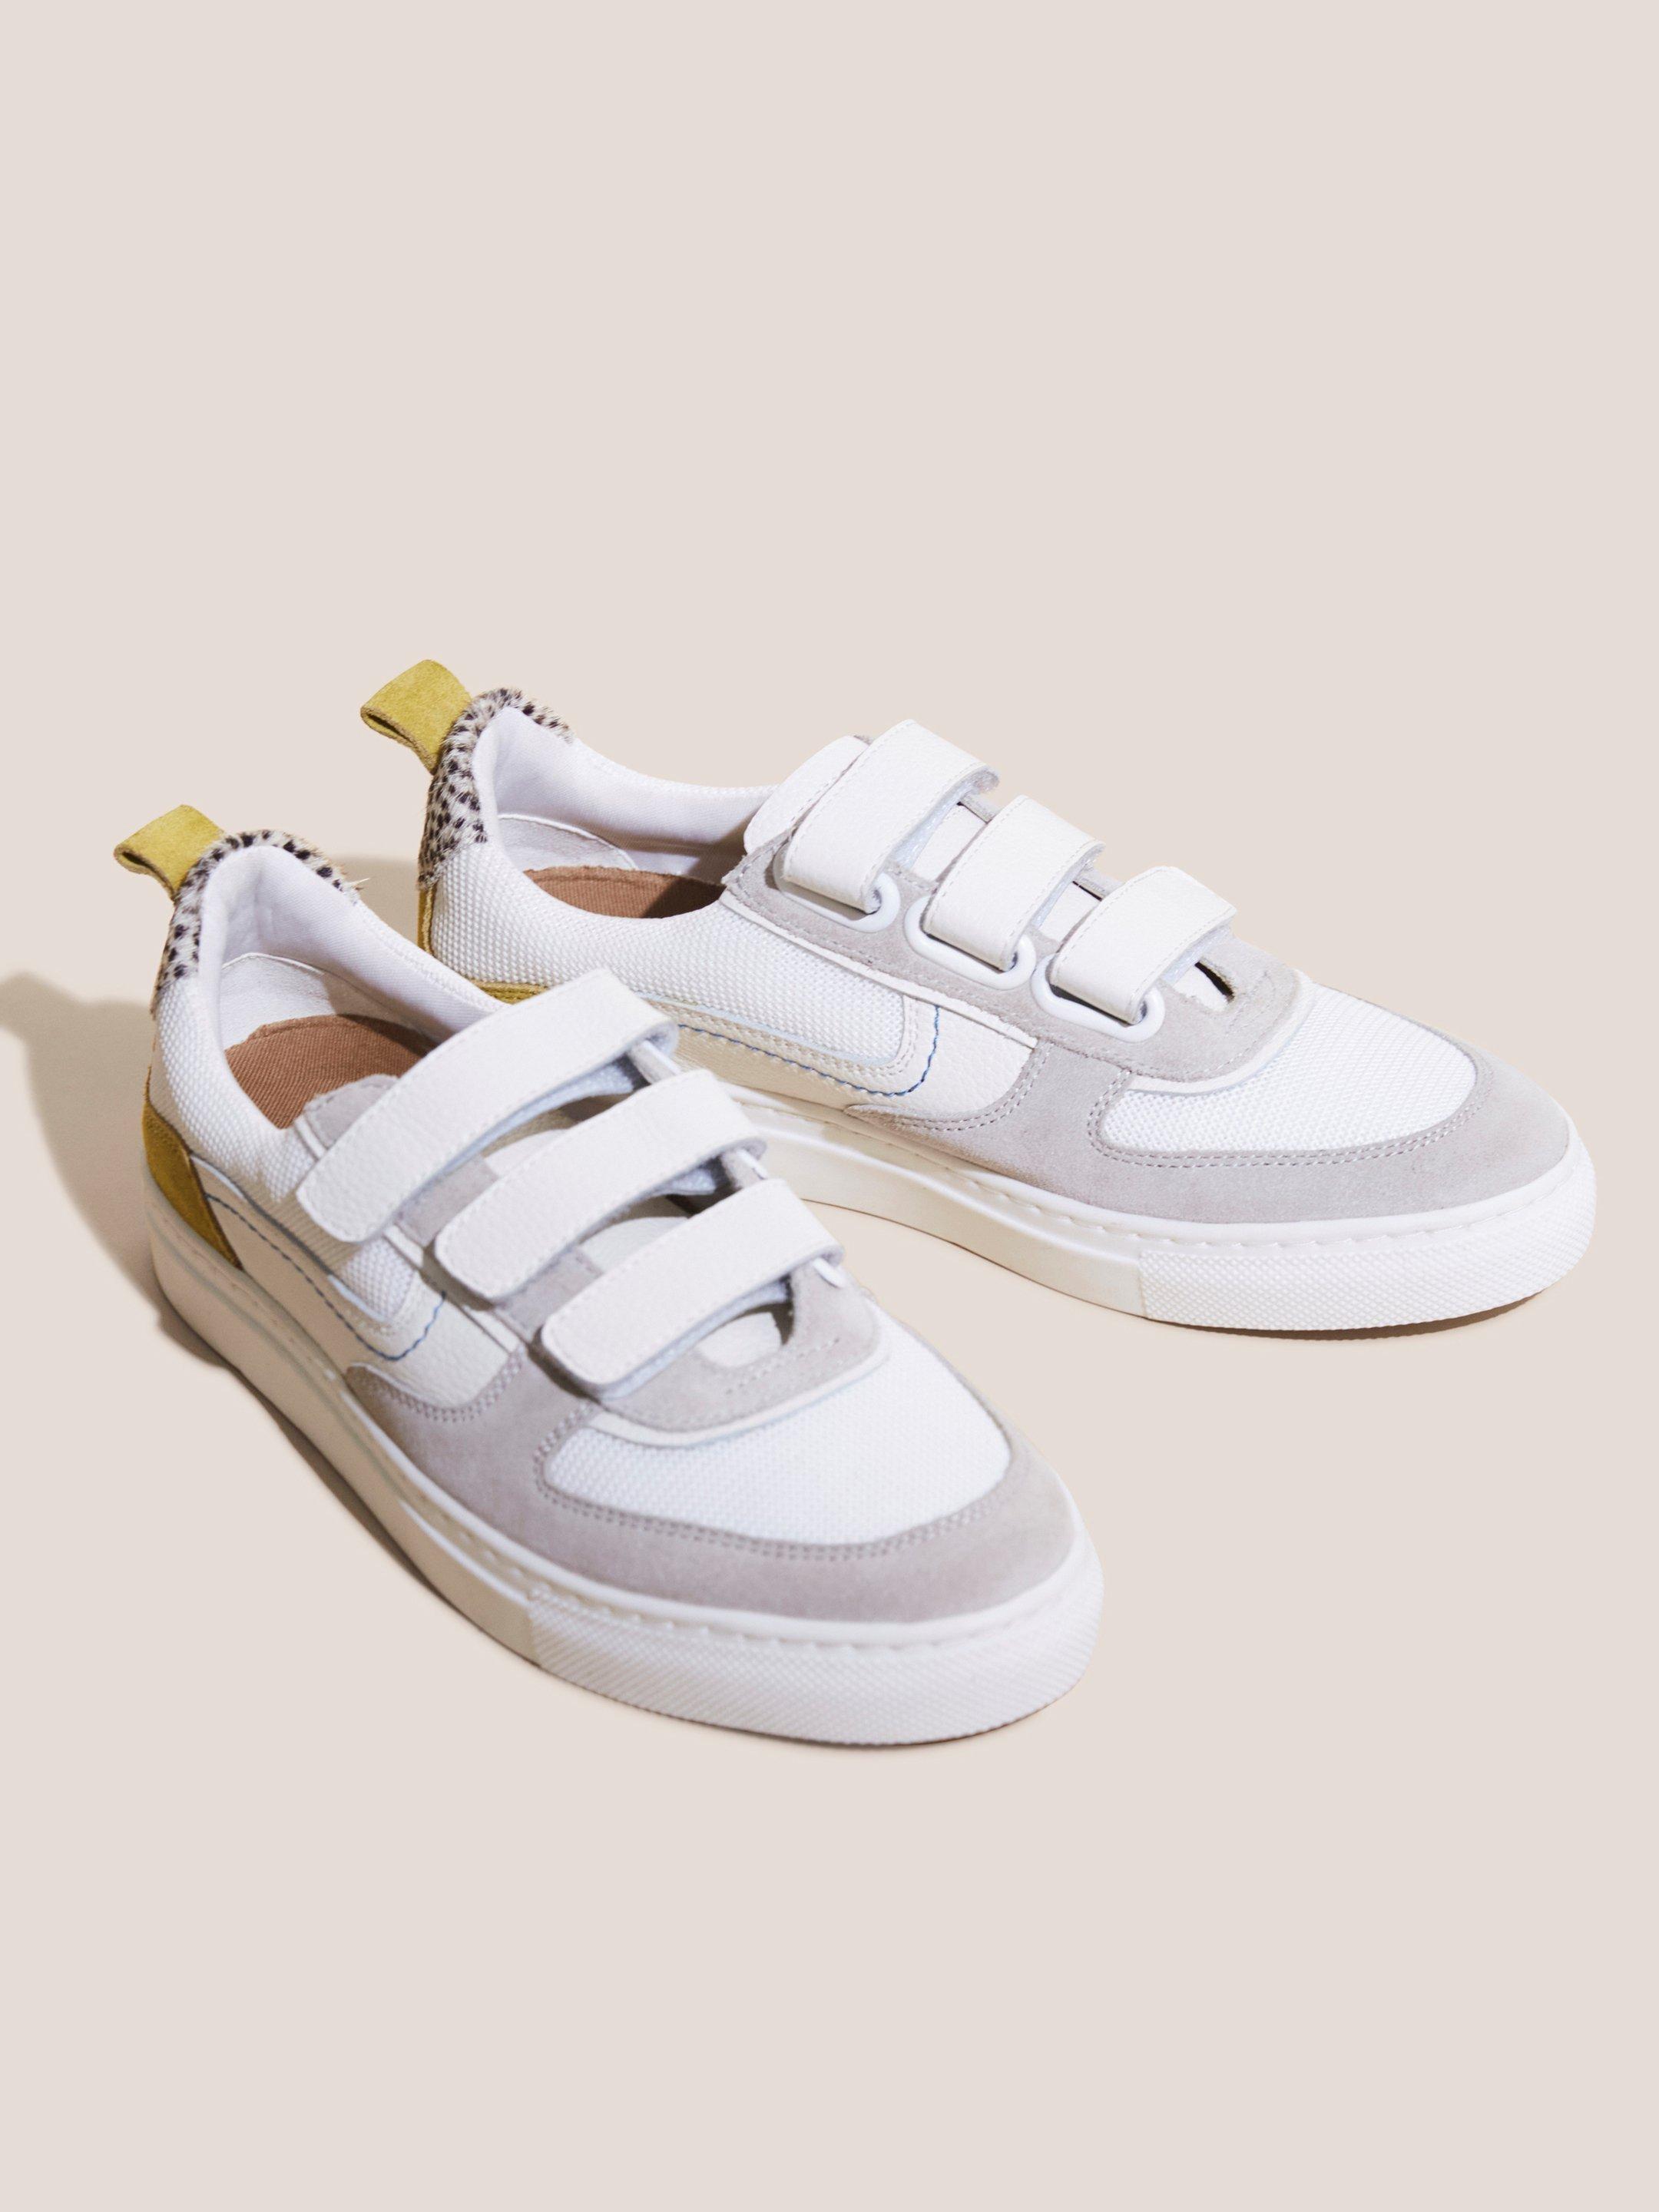 Tabitha Velcro Leather Trainer in WHITE MLT - FLAT FRONT